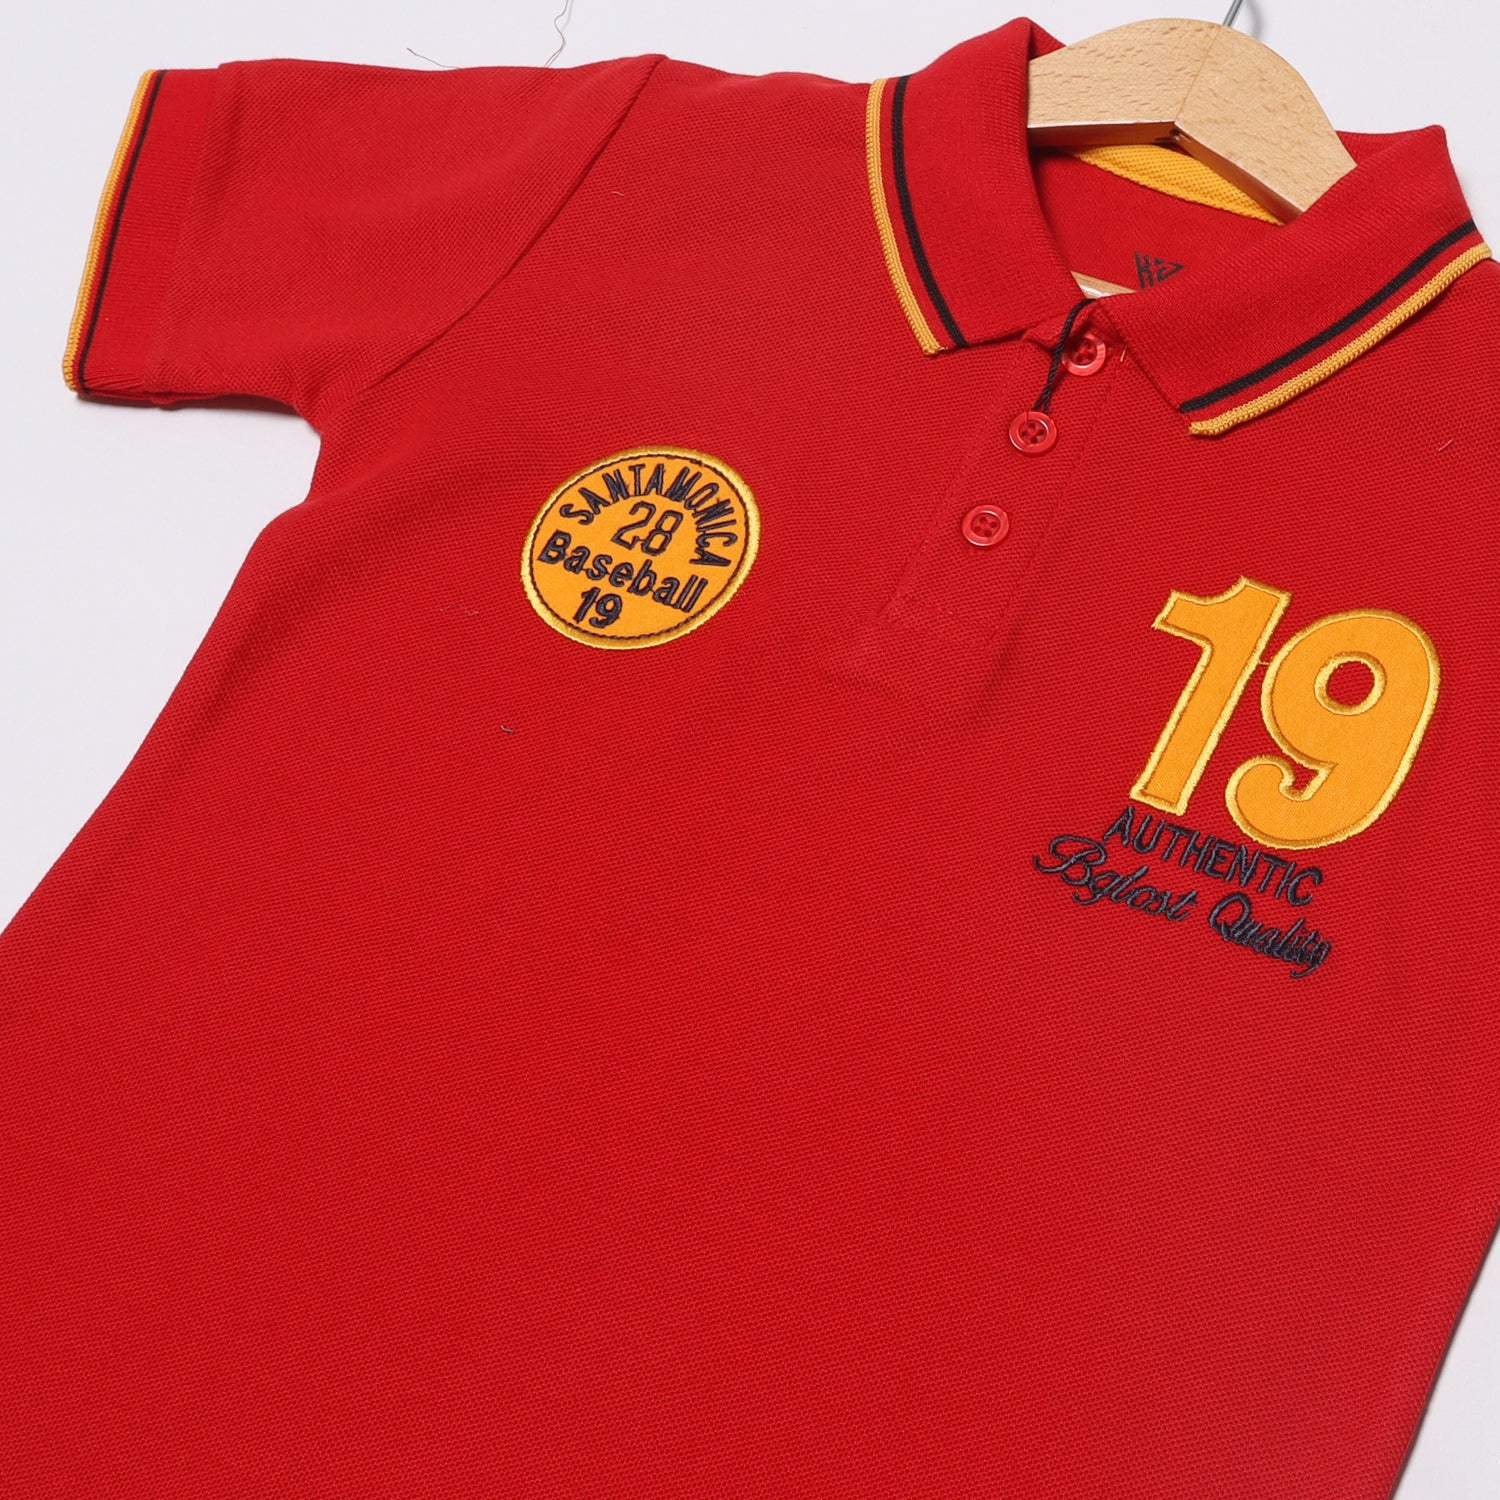 RED POLO "19 AUTHENTIC" PRINTED HALF SLEEVES T-SHIRT